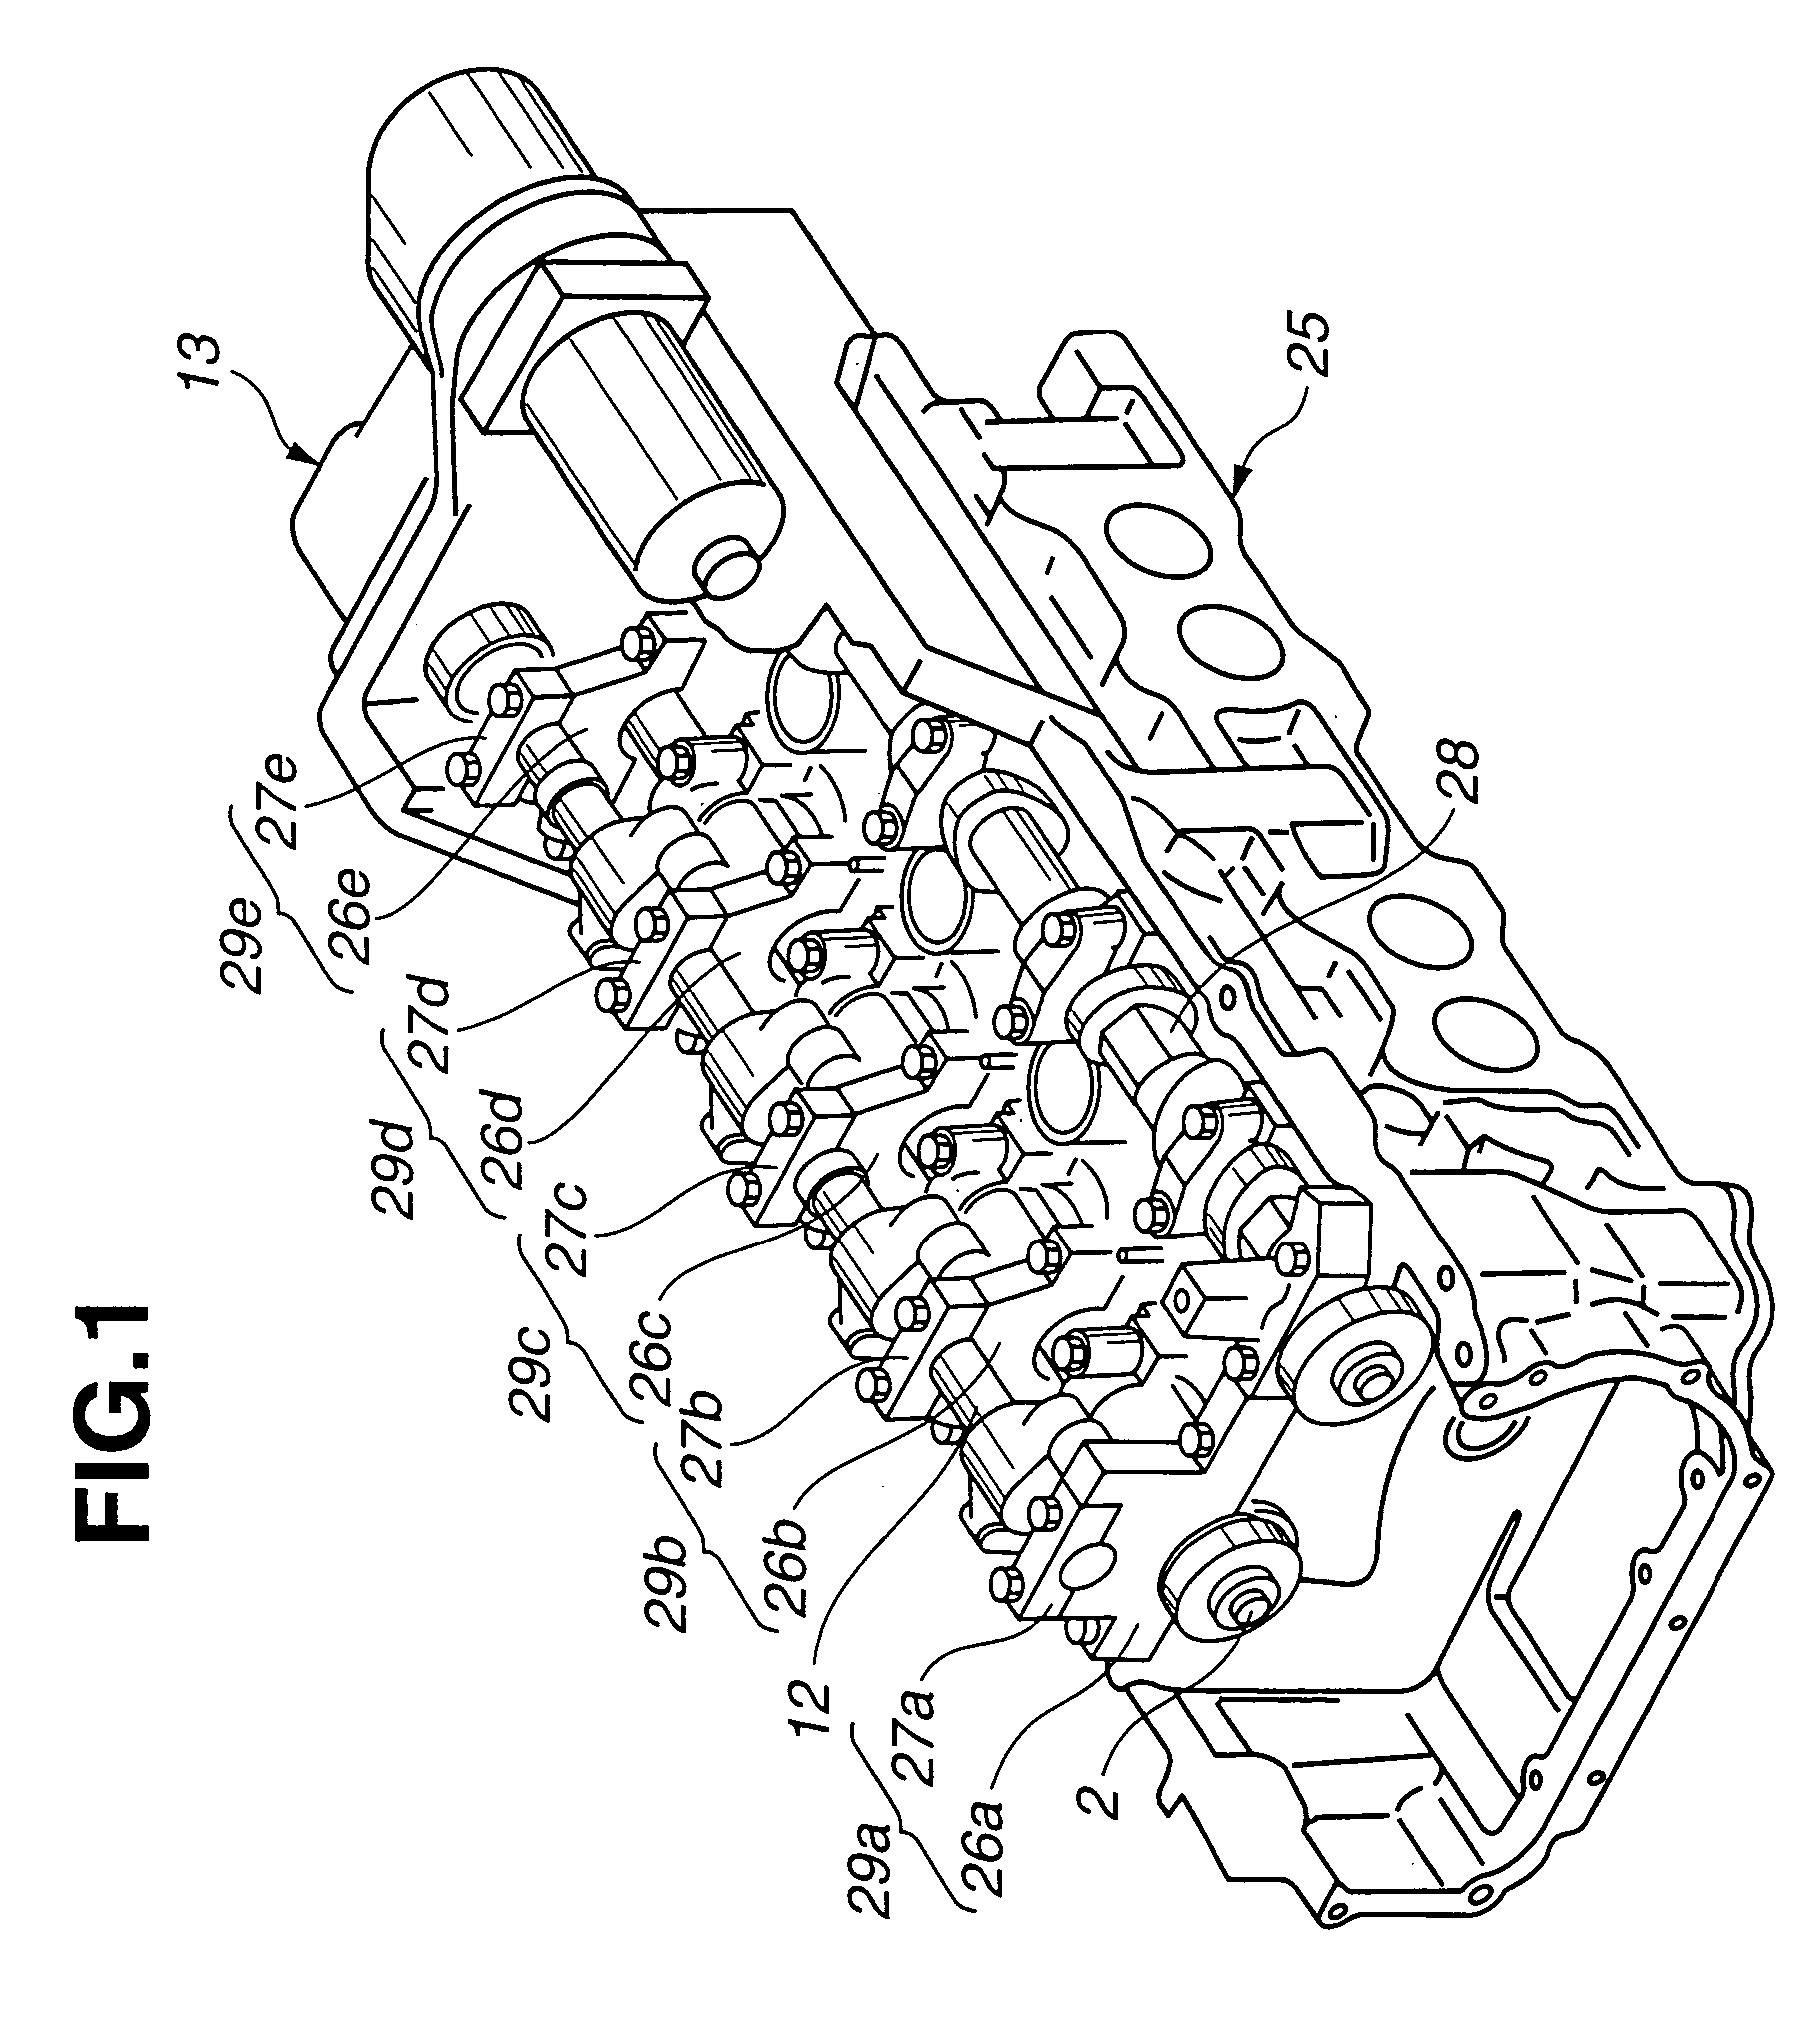 Variable valve actuating mechanism for internal combustion engine